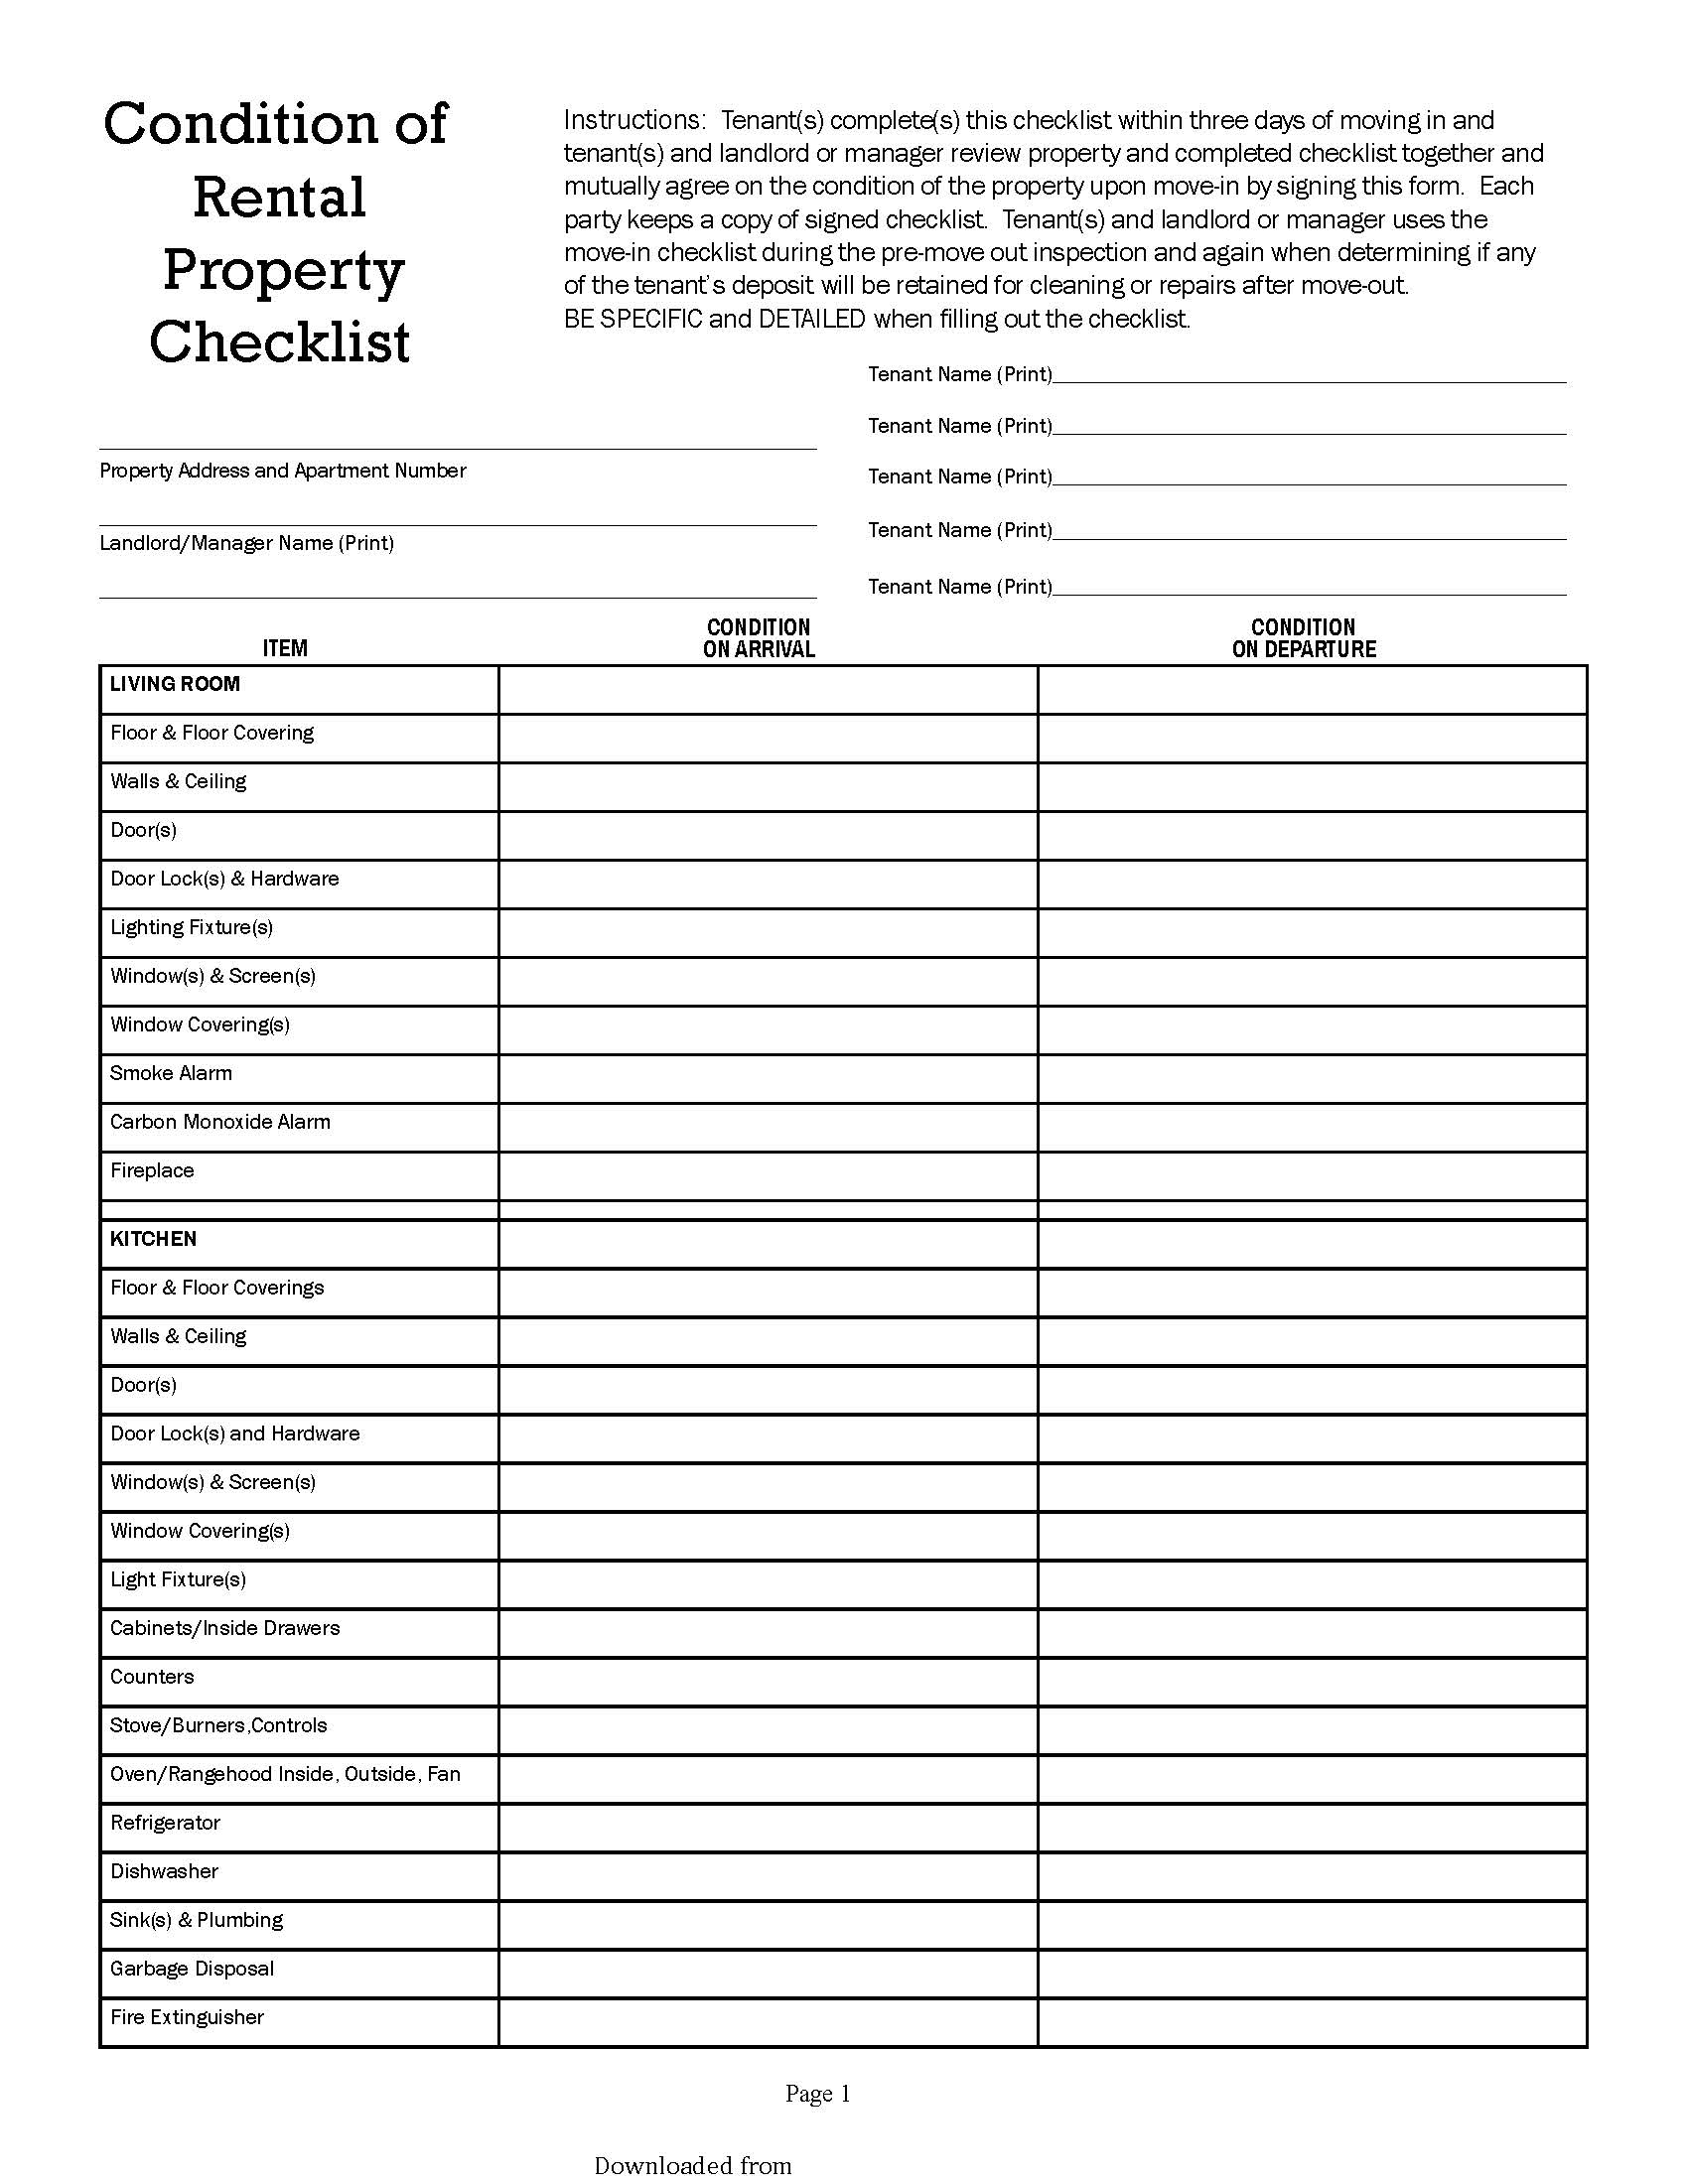 Condition Of Rental Property Checklist – PDF Format  E Database